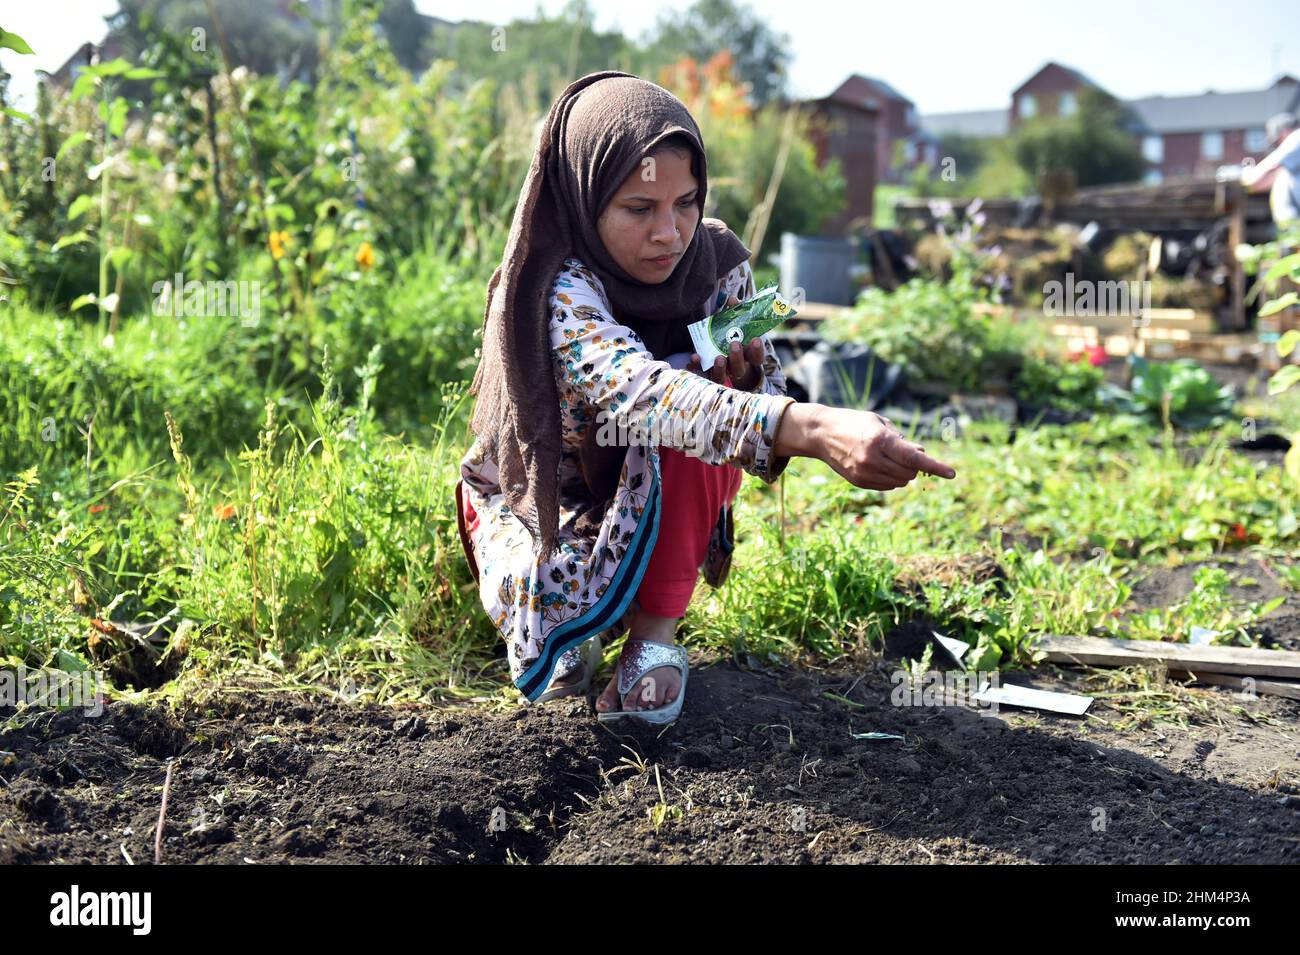 A young woman sows seeds on a community allotment, Leeds, UK Stock Photo